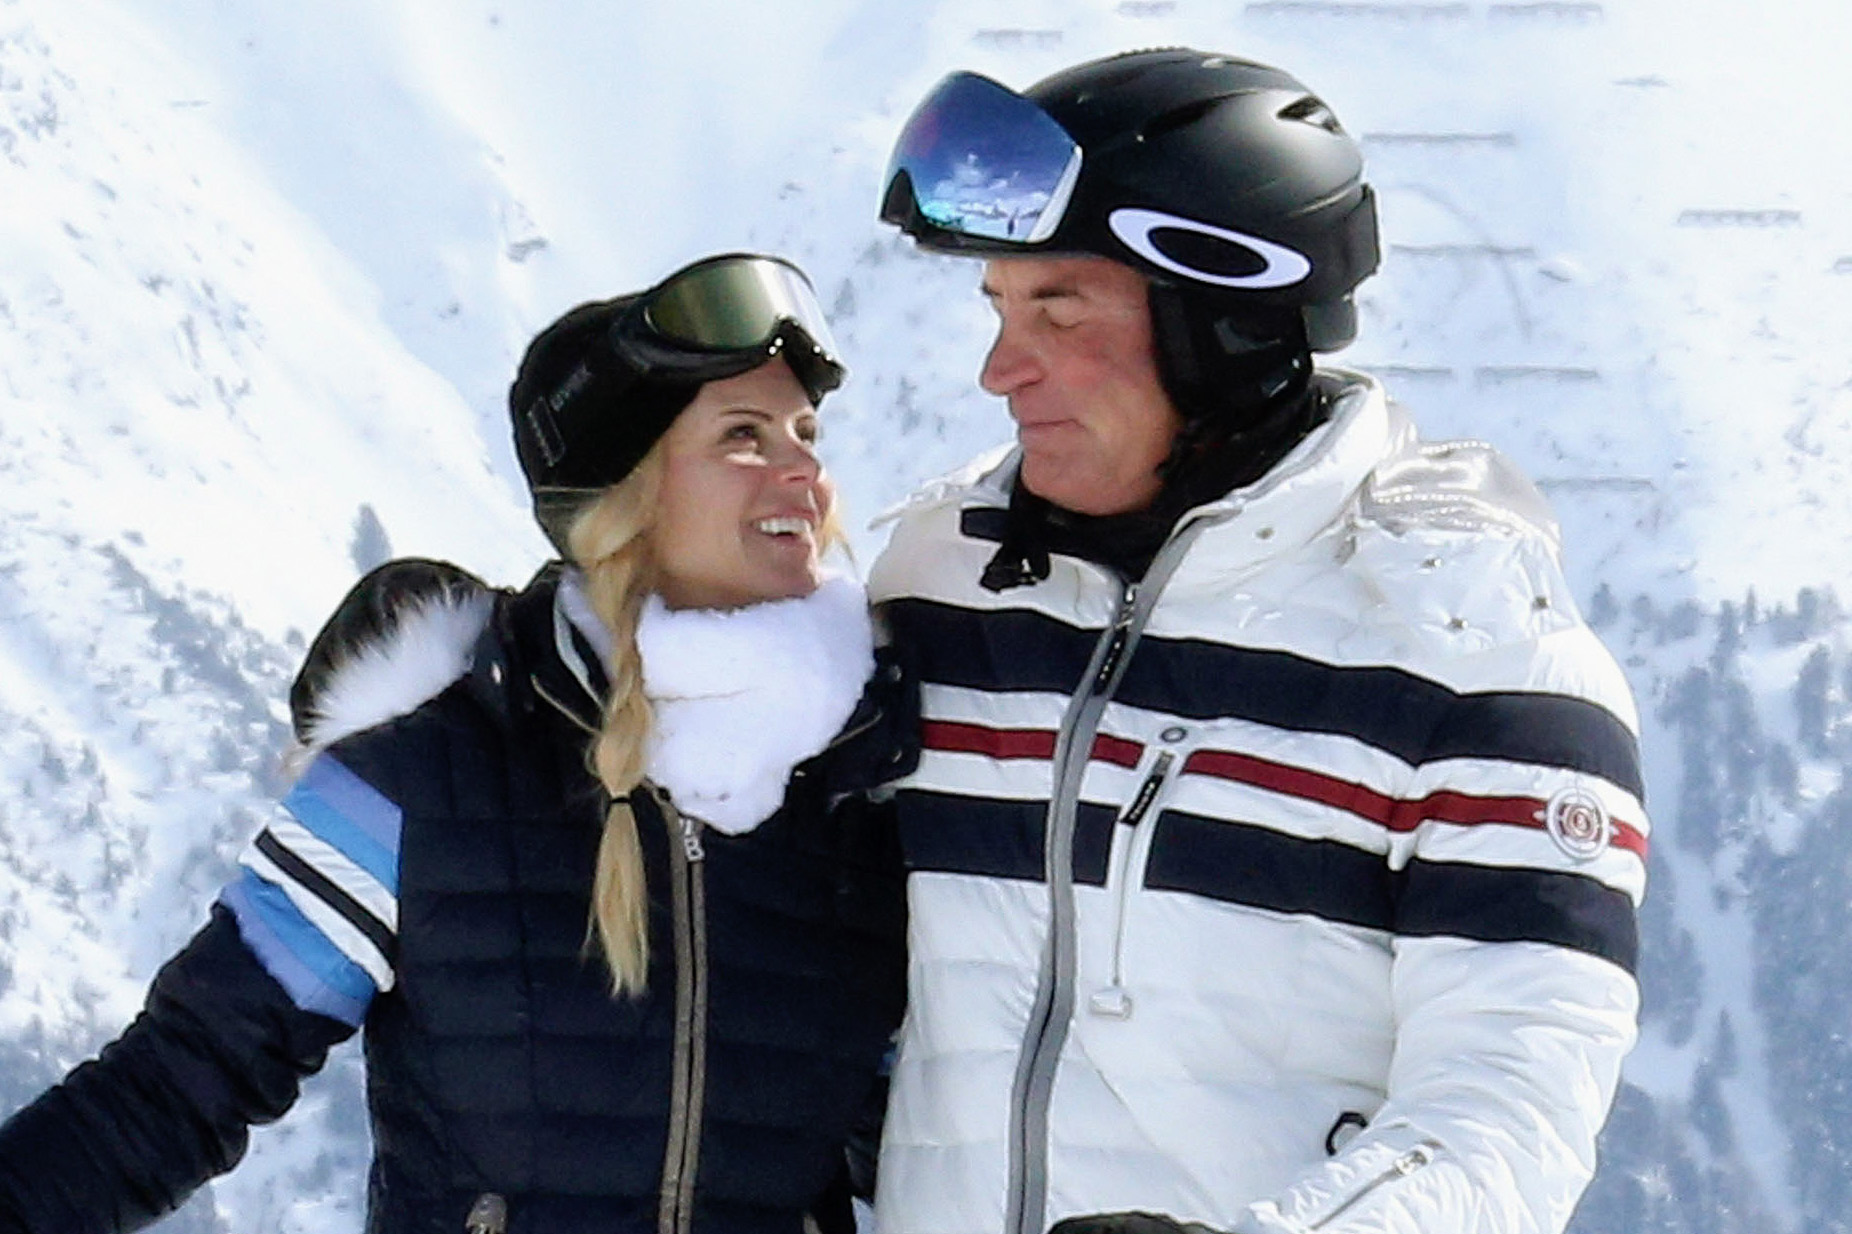 A man and a woman on a ski slope.